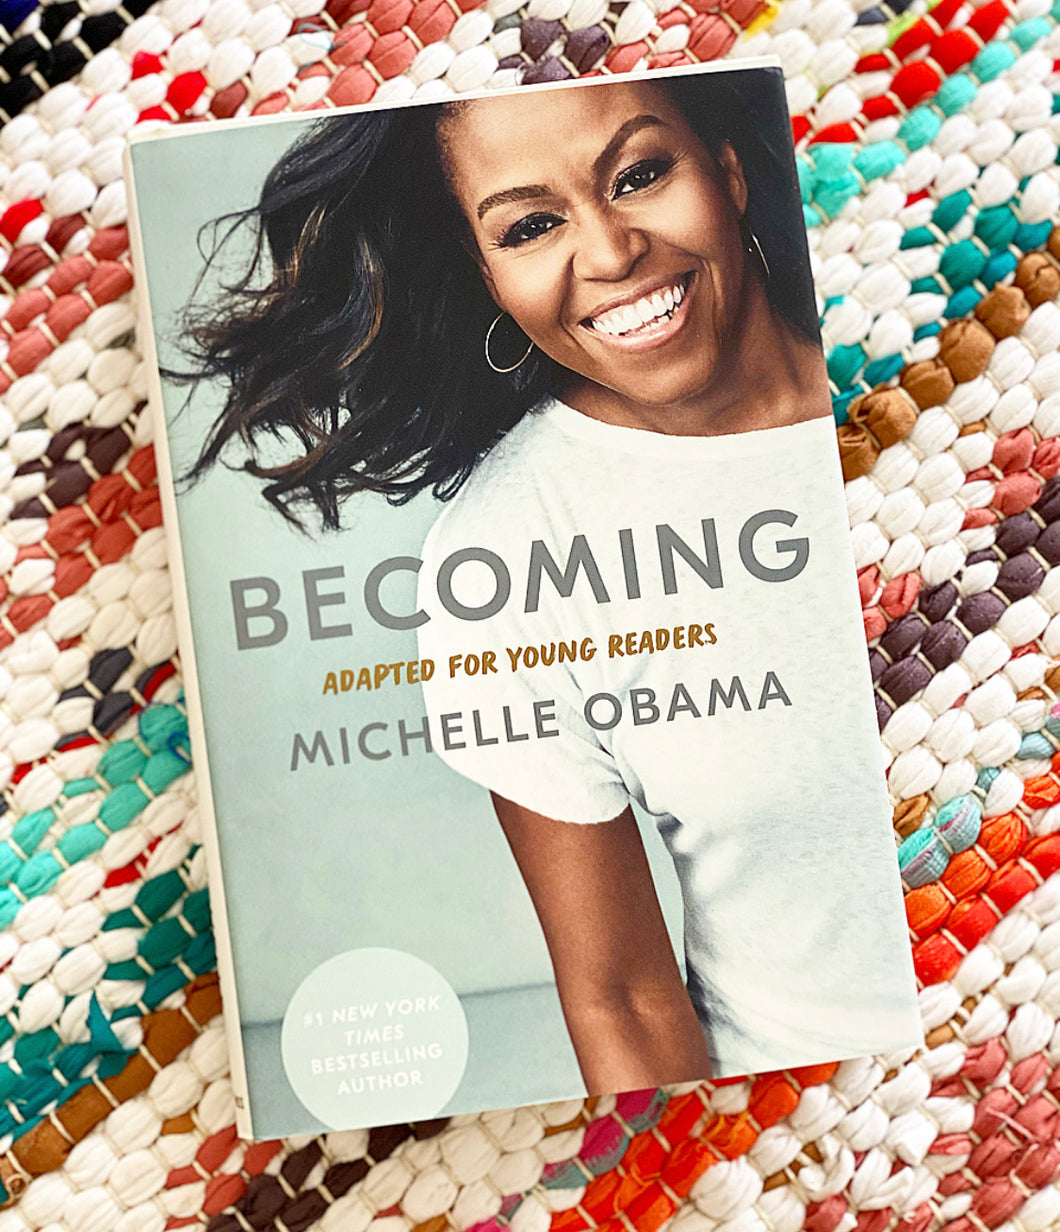 Becoming: Adapted for Young Readers  | MICHELLE OBAMA